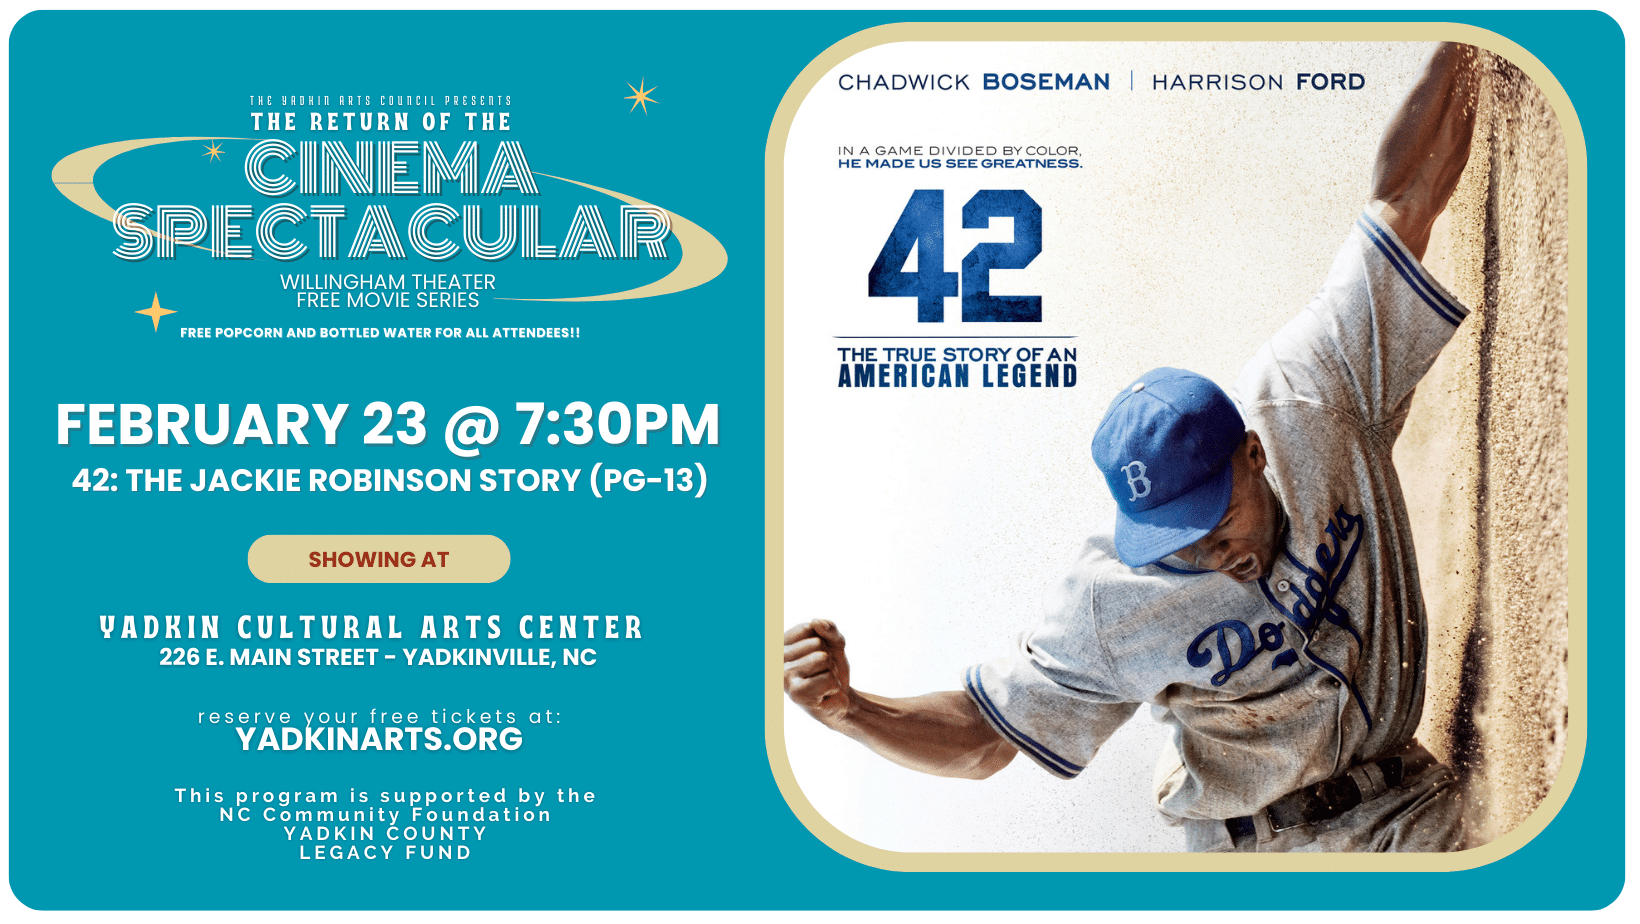 The Return of the Cinema Spectacular Free Movies Series - 42: THE JACKIE ROBINSON STORY (PG-13) - February 23, 2024 @ 7:30pm